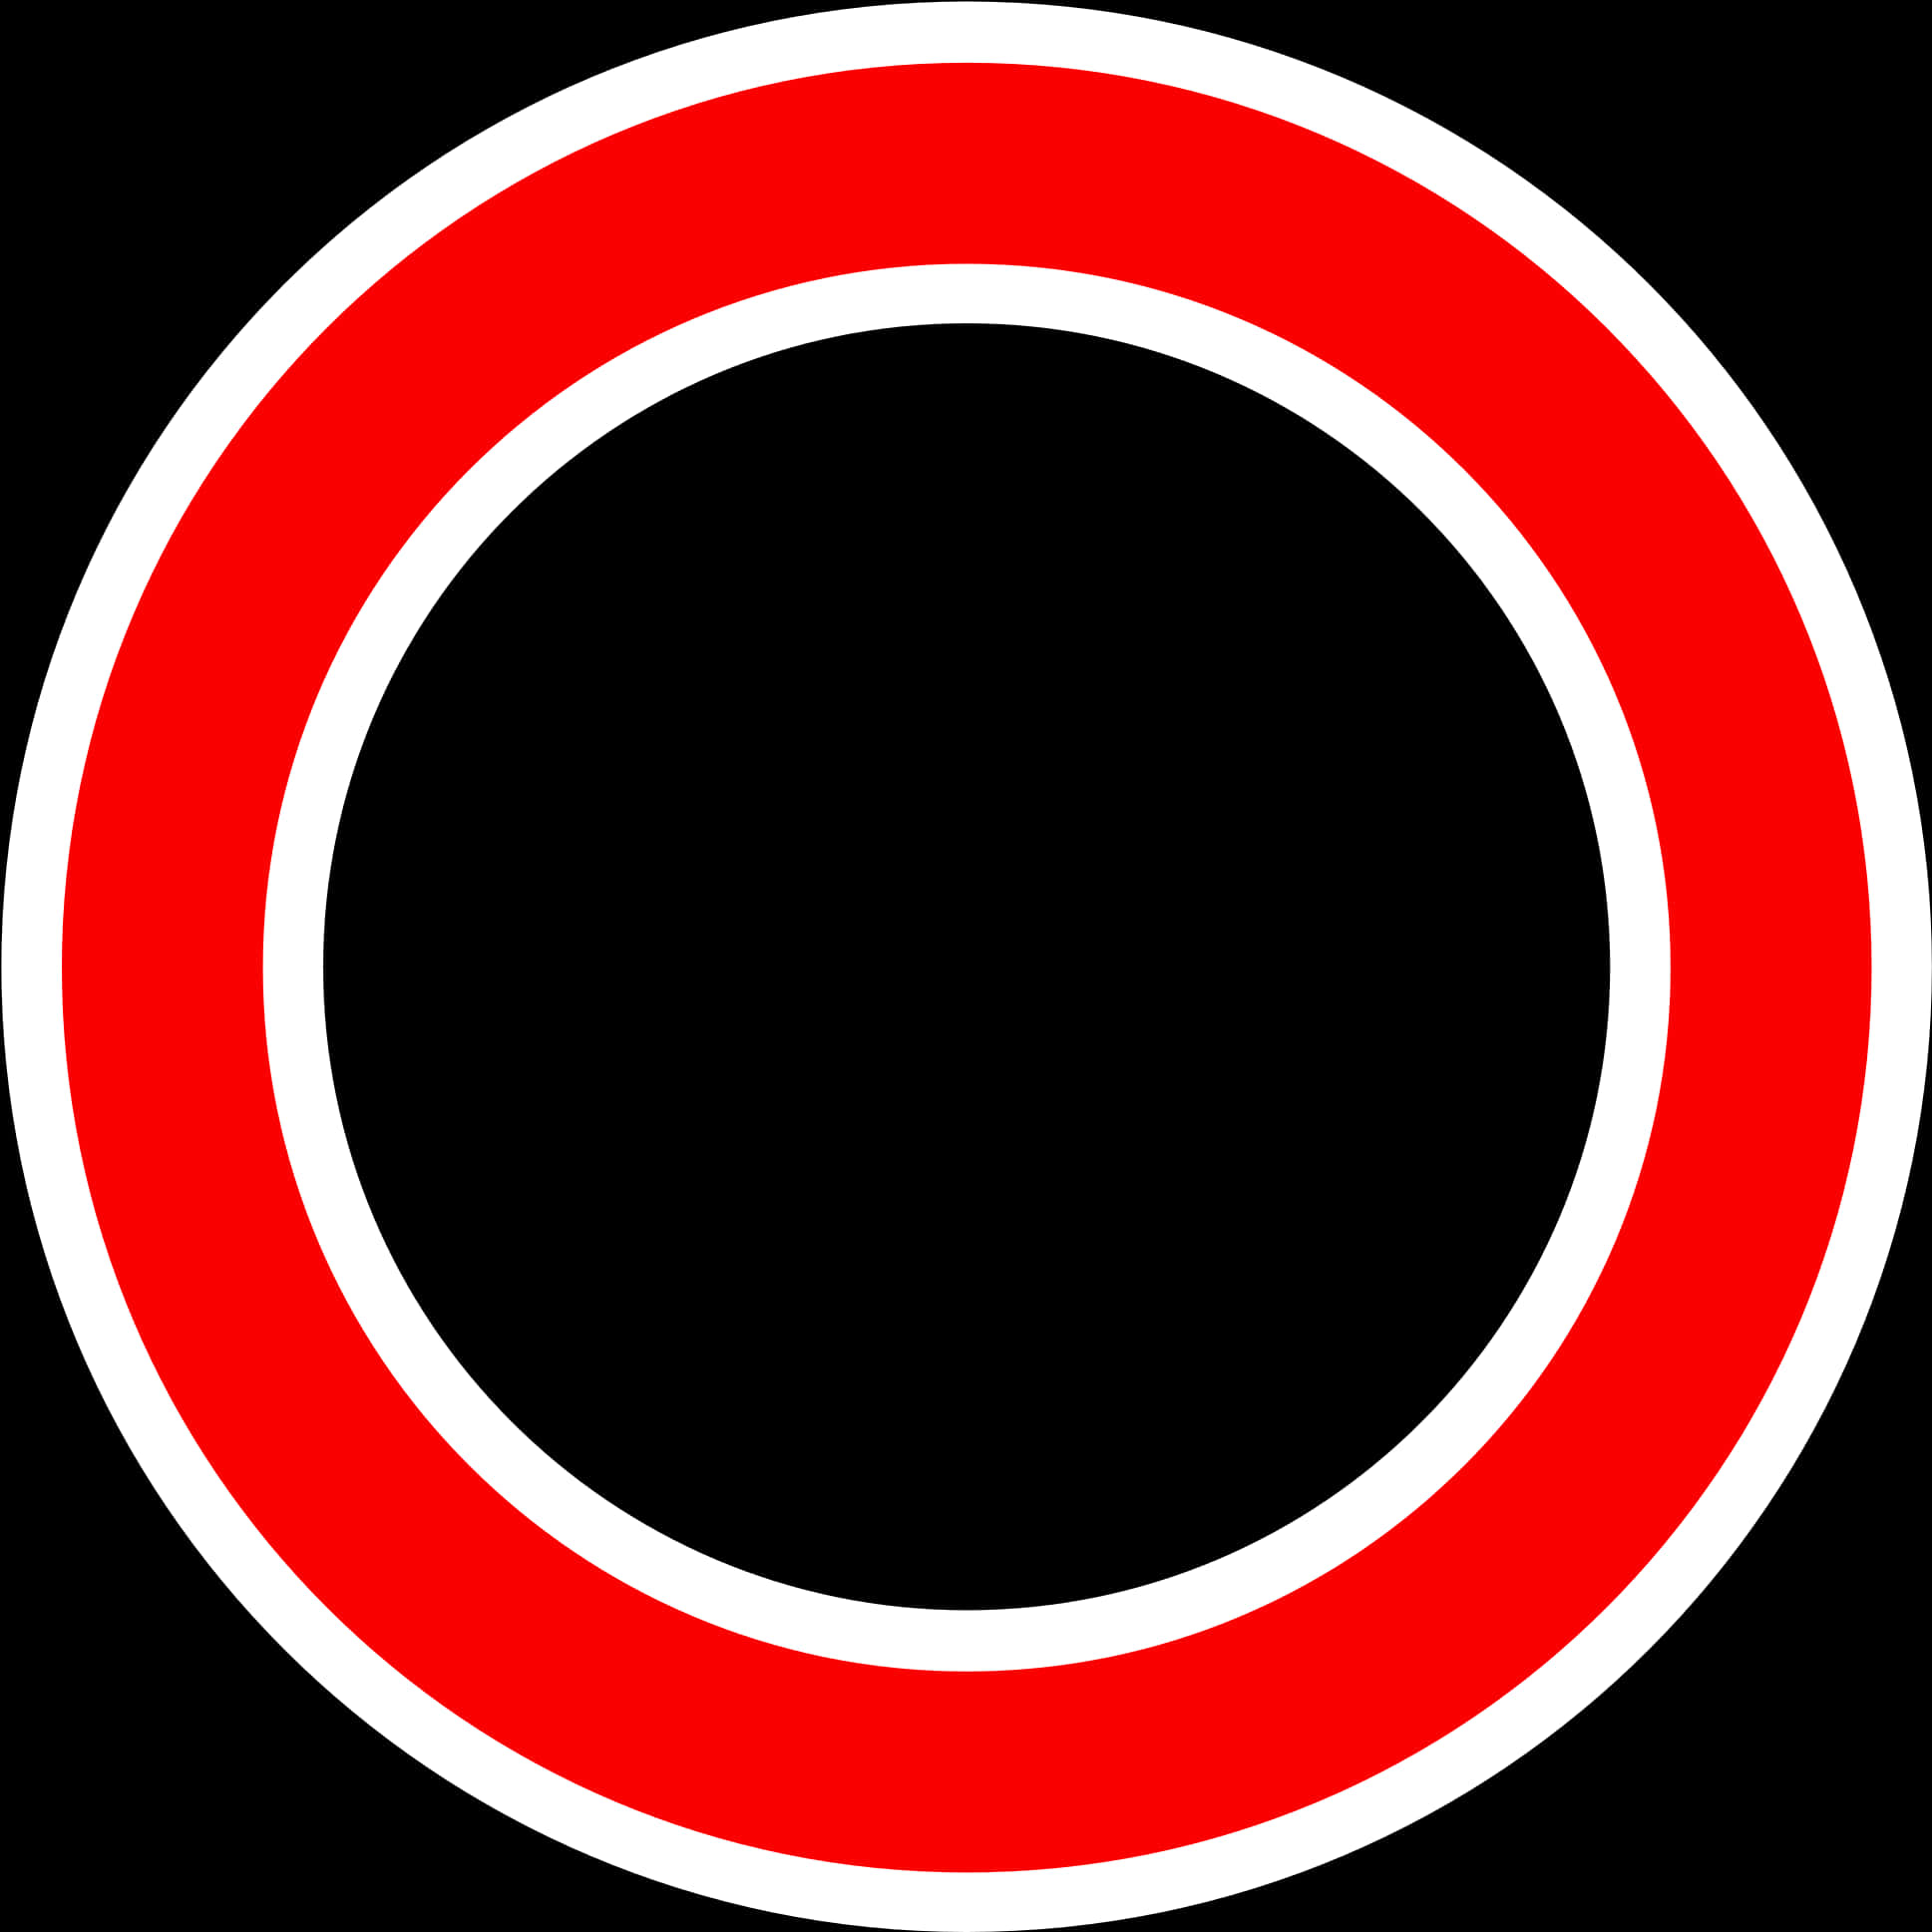 A Red Circle With White Border